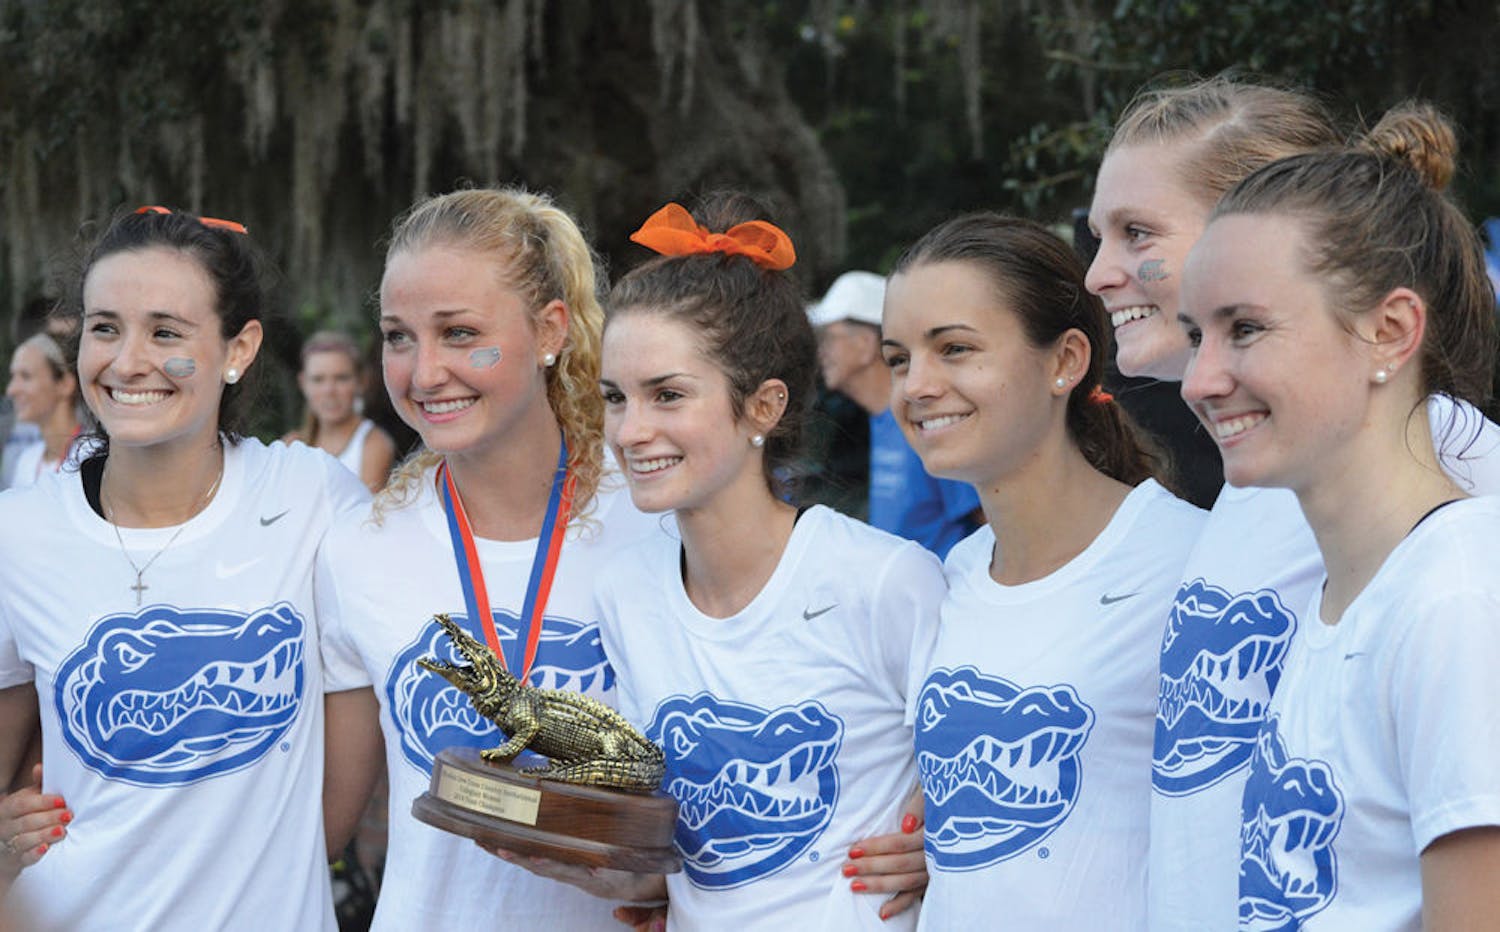 The Florida women's cross country team accepts its first-place trophy at the 2014 Mountain Dew Invitational